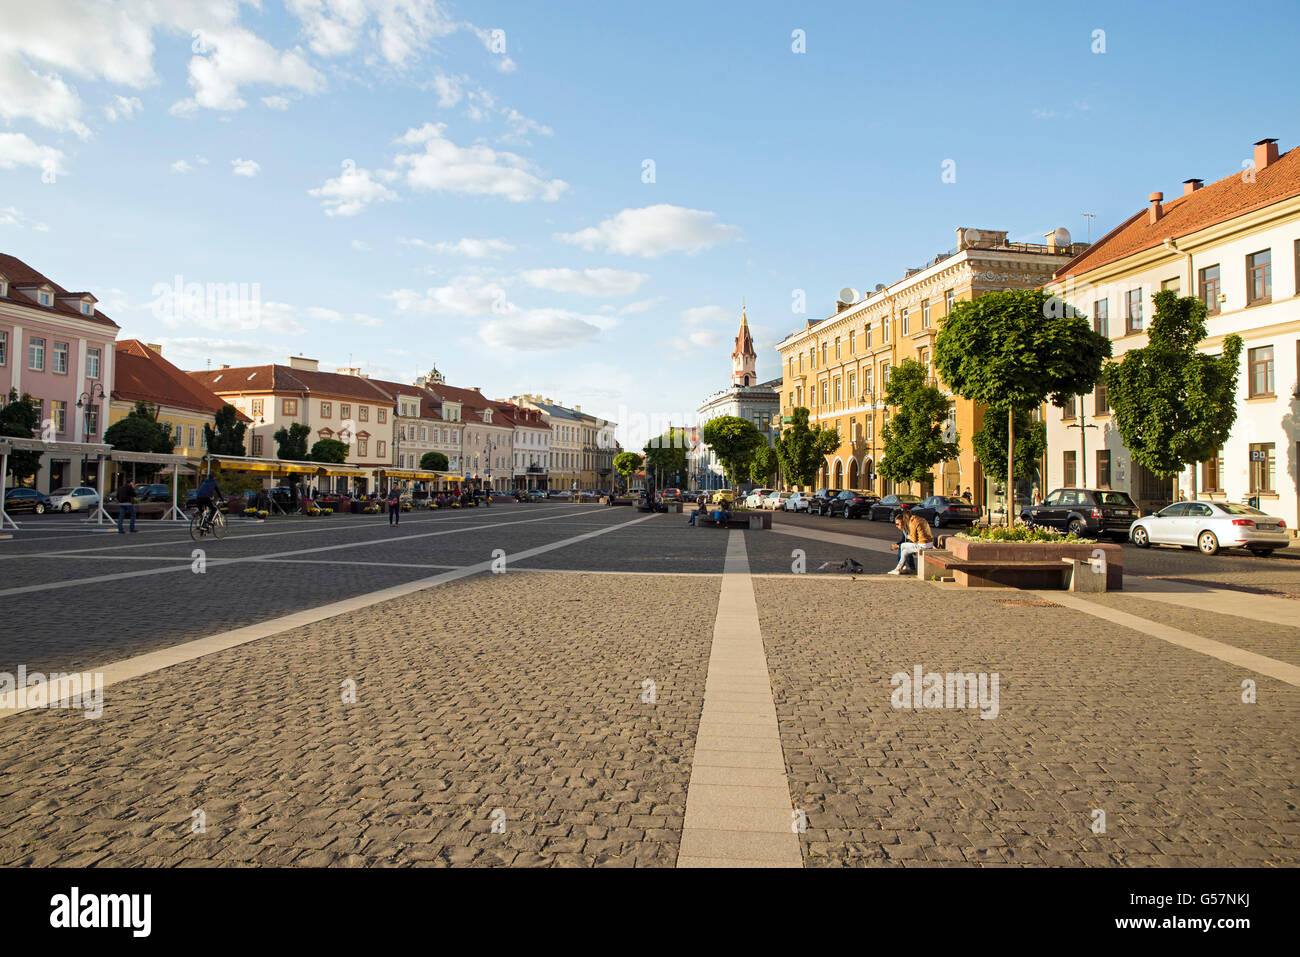 VILNIUS, LITHUANIA - JUNE 7, 2016: People at the historical Town Hall Square  in the Old Town of Vilnius. Stock Photo